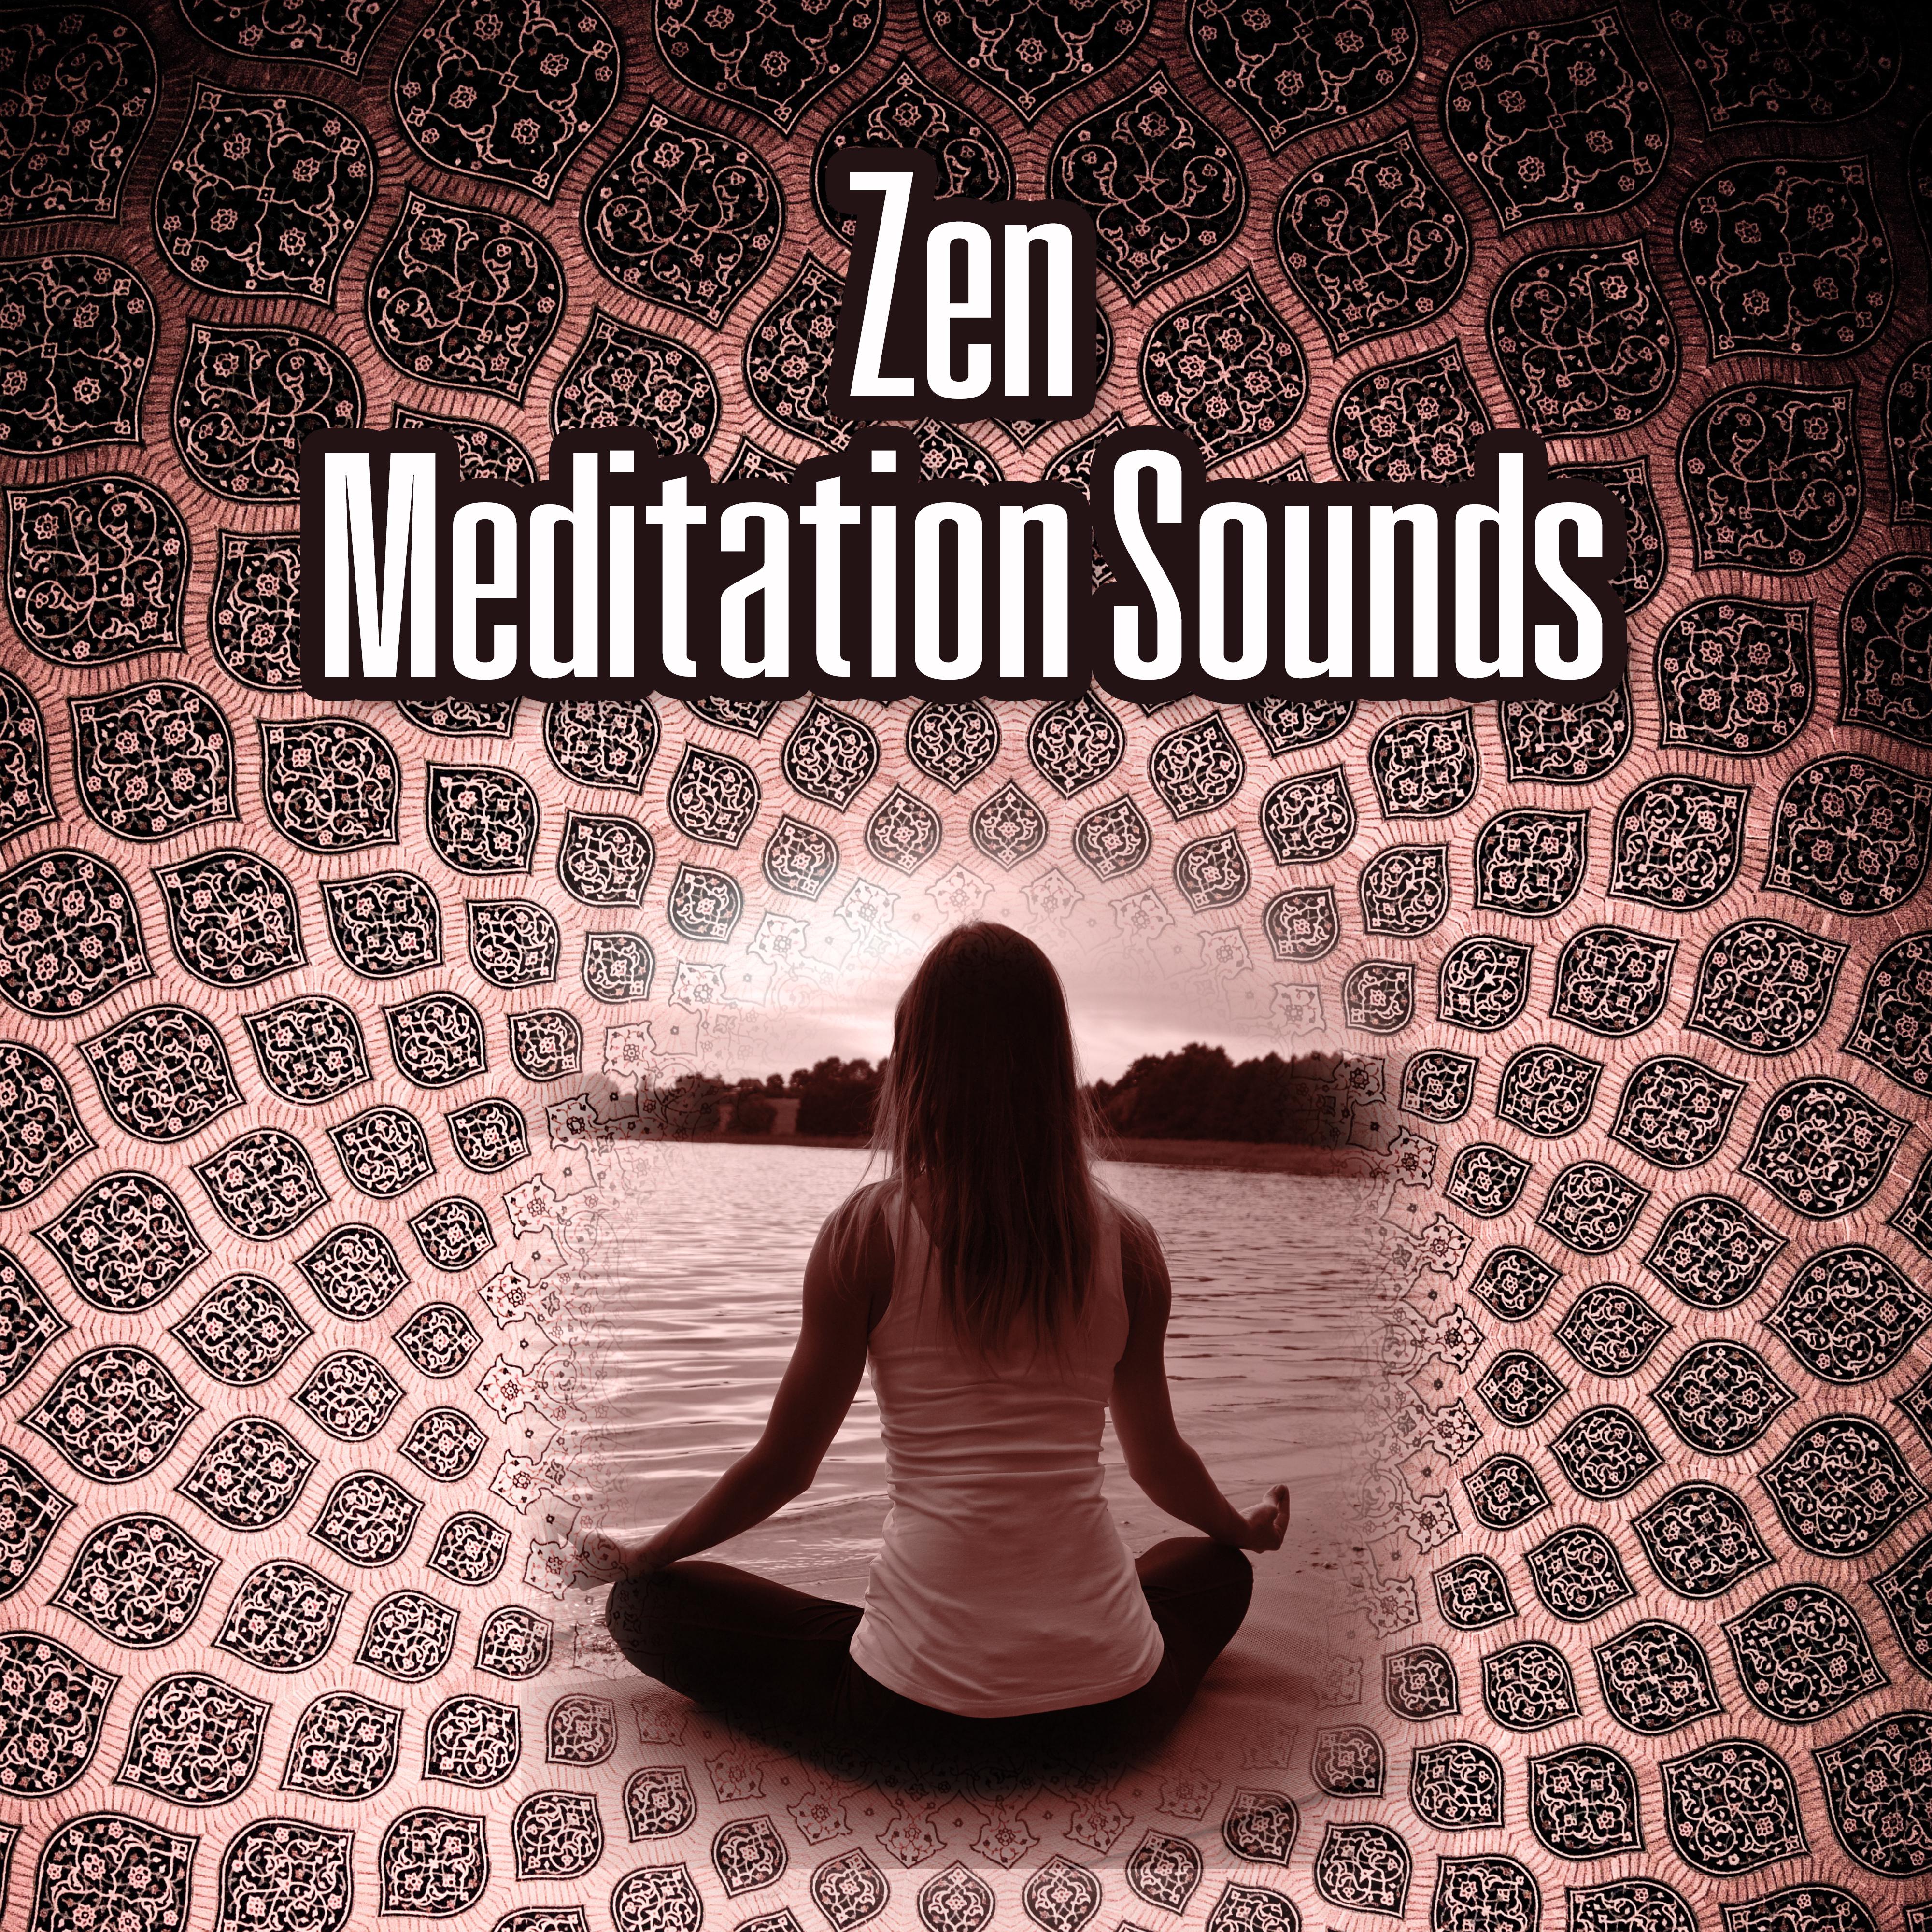 Zen Meditation Sounds - Healing Massage Music, New Age for Healing Through Sound and Touch, Pacific Ocean Waves for Well Being and Healthy Lifestyle, Water & Rain Sounds, Serenity Spa